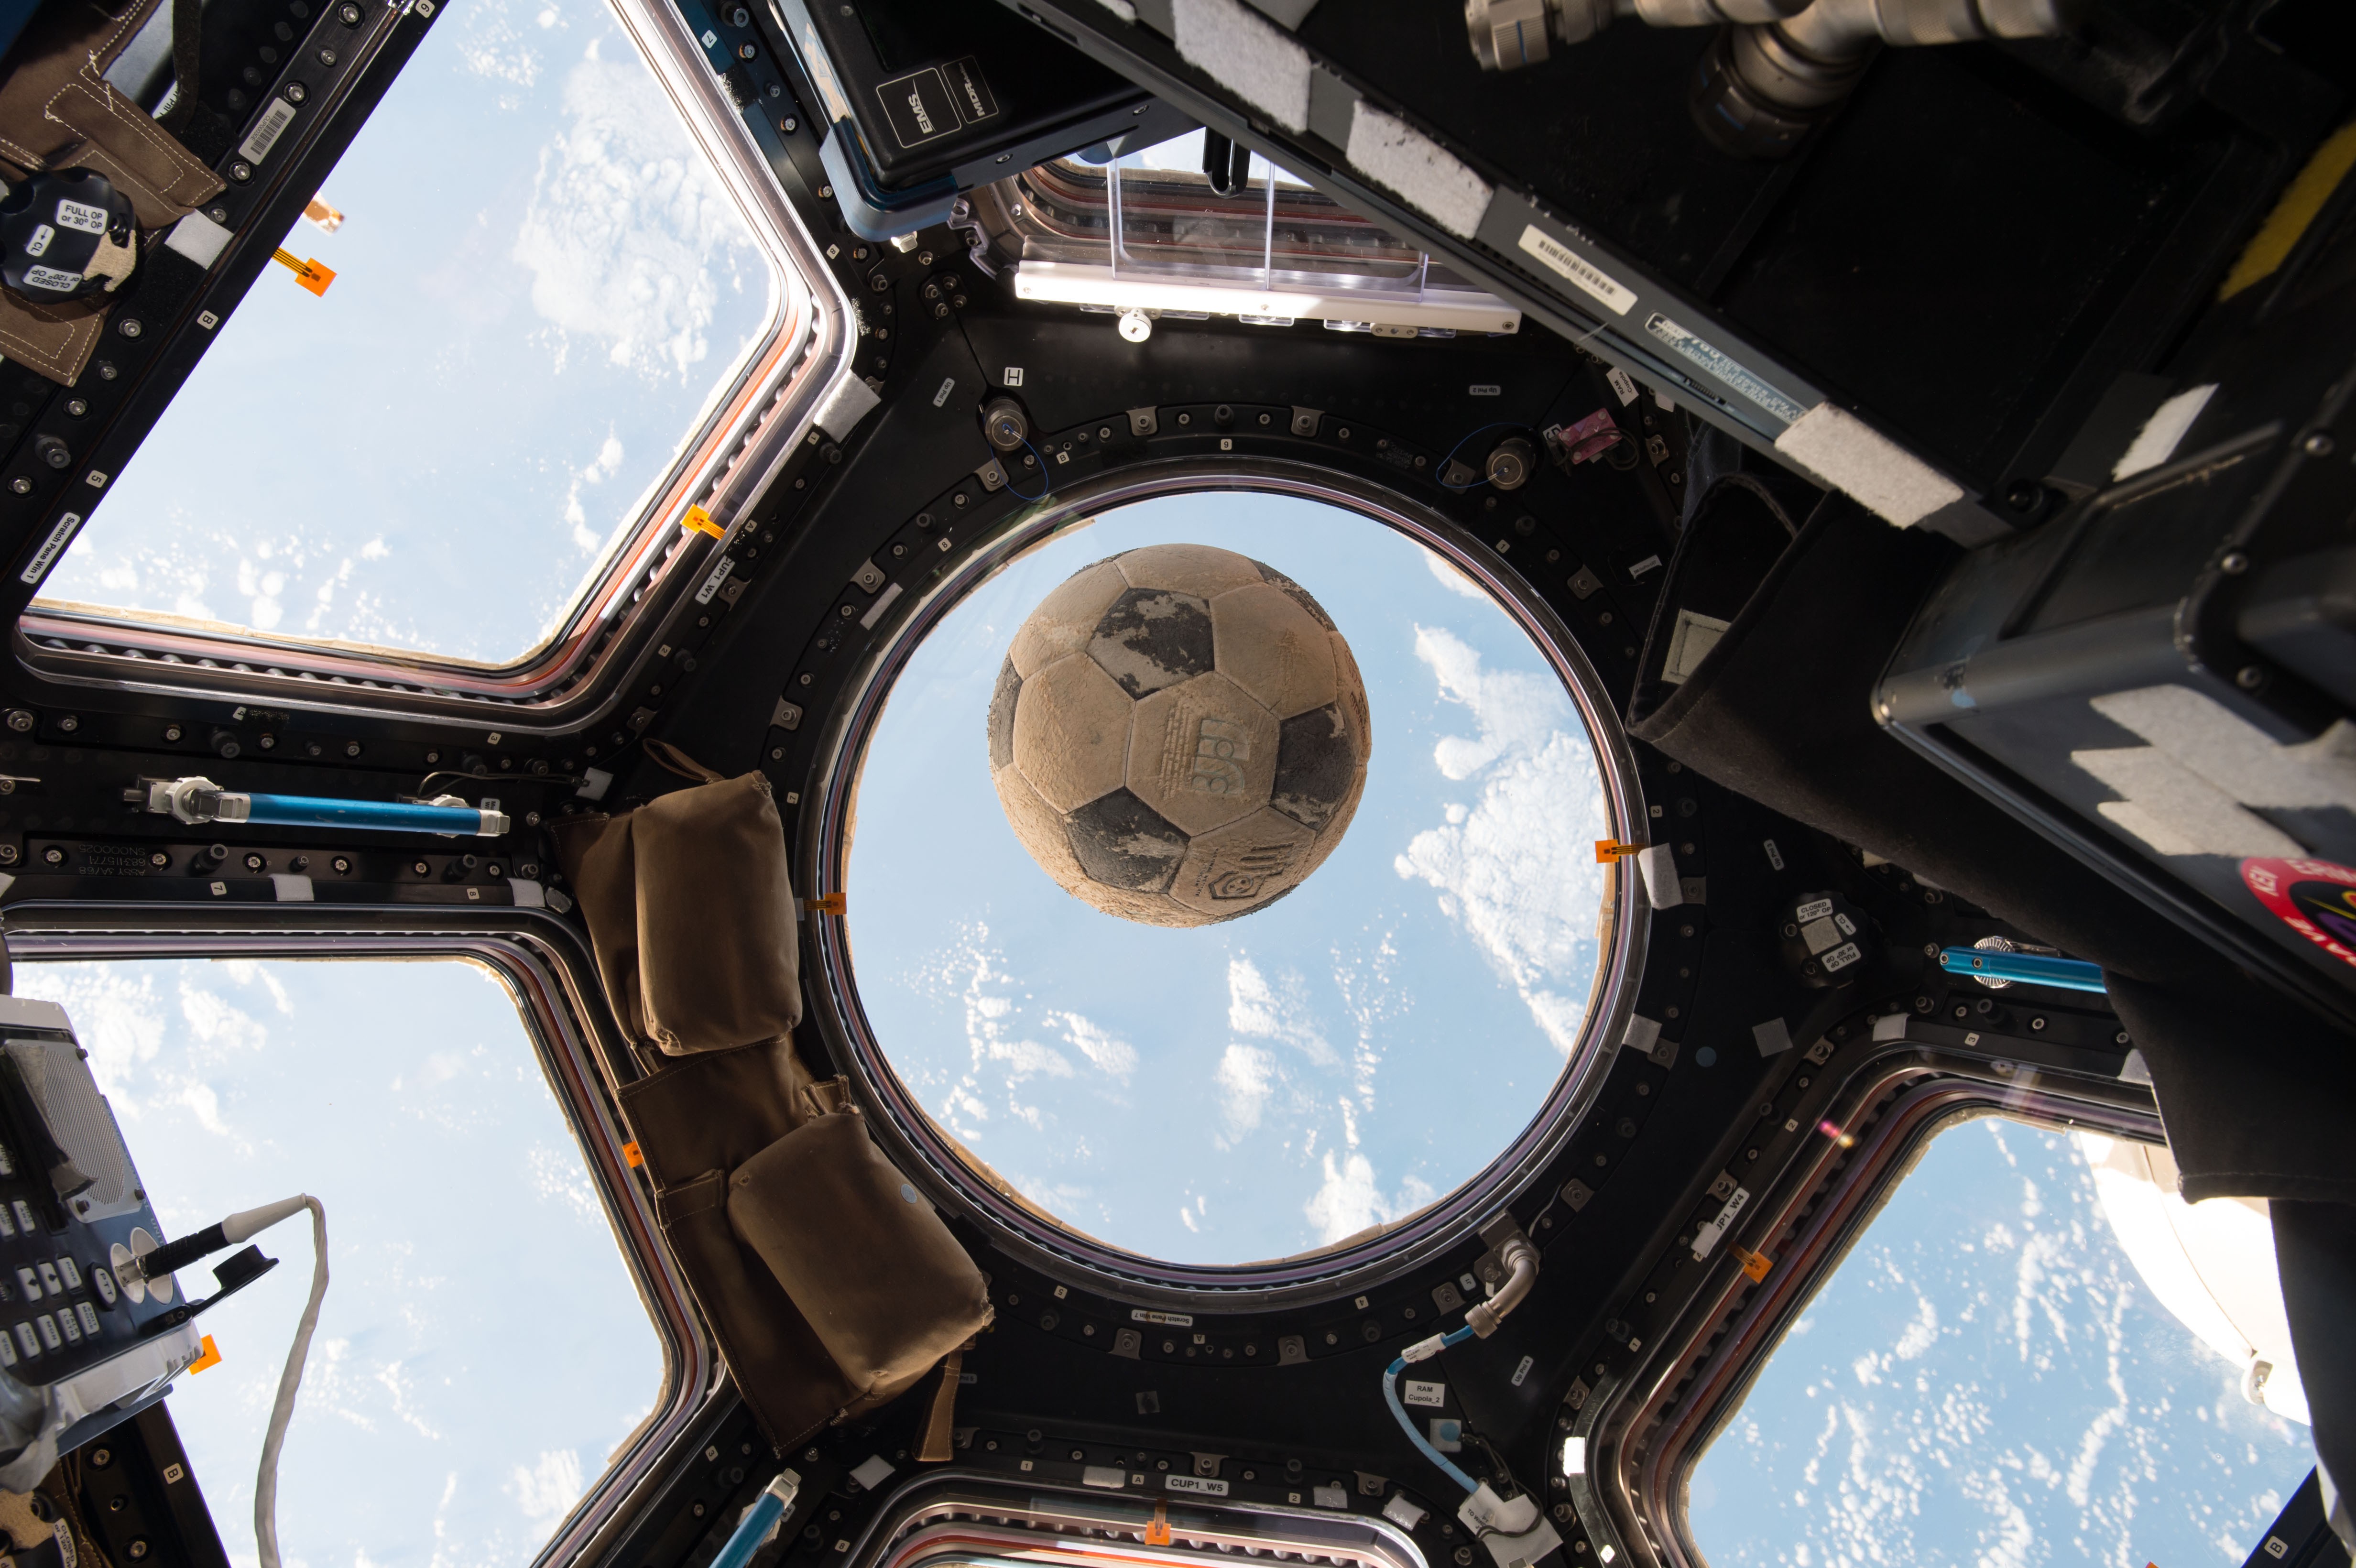 General 4928x3280 space soccer ball Earth space station